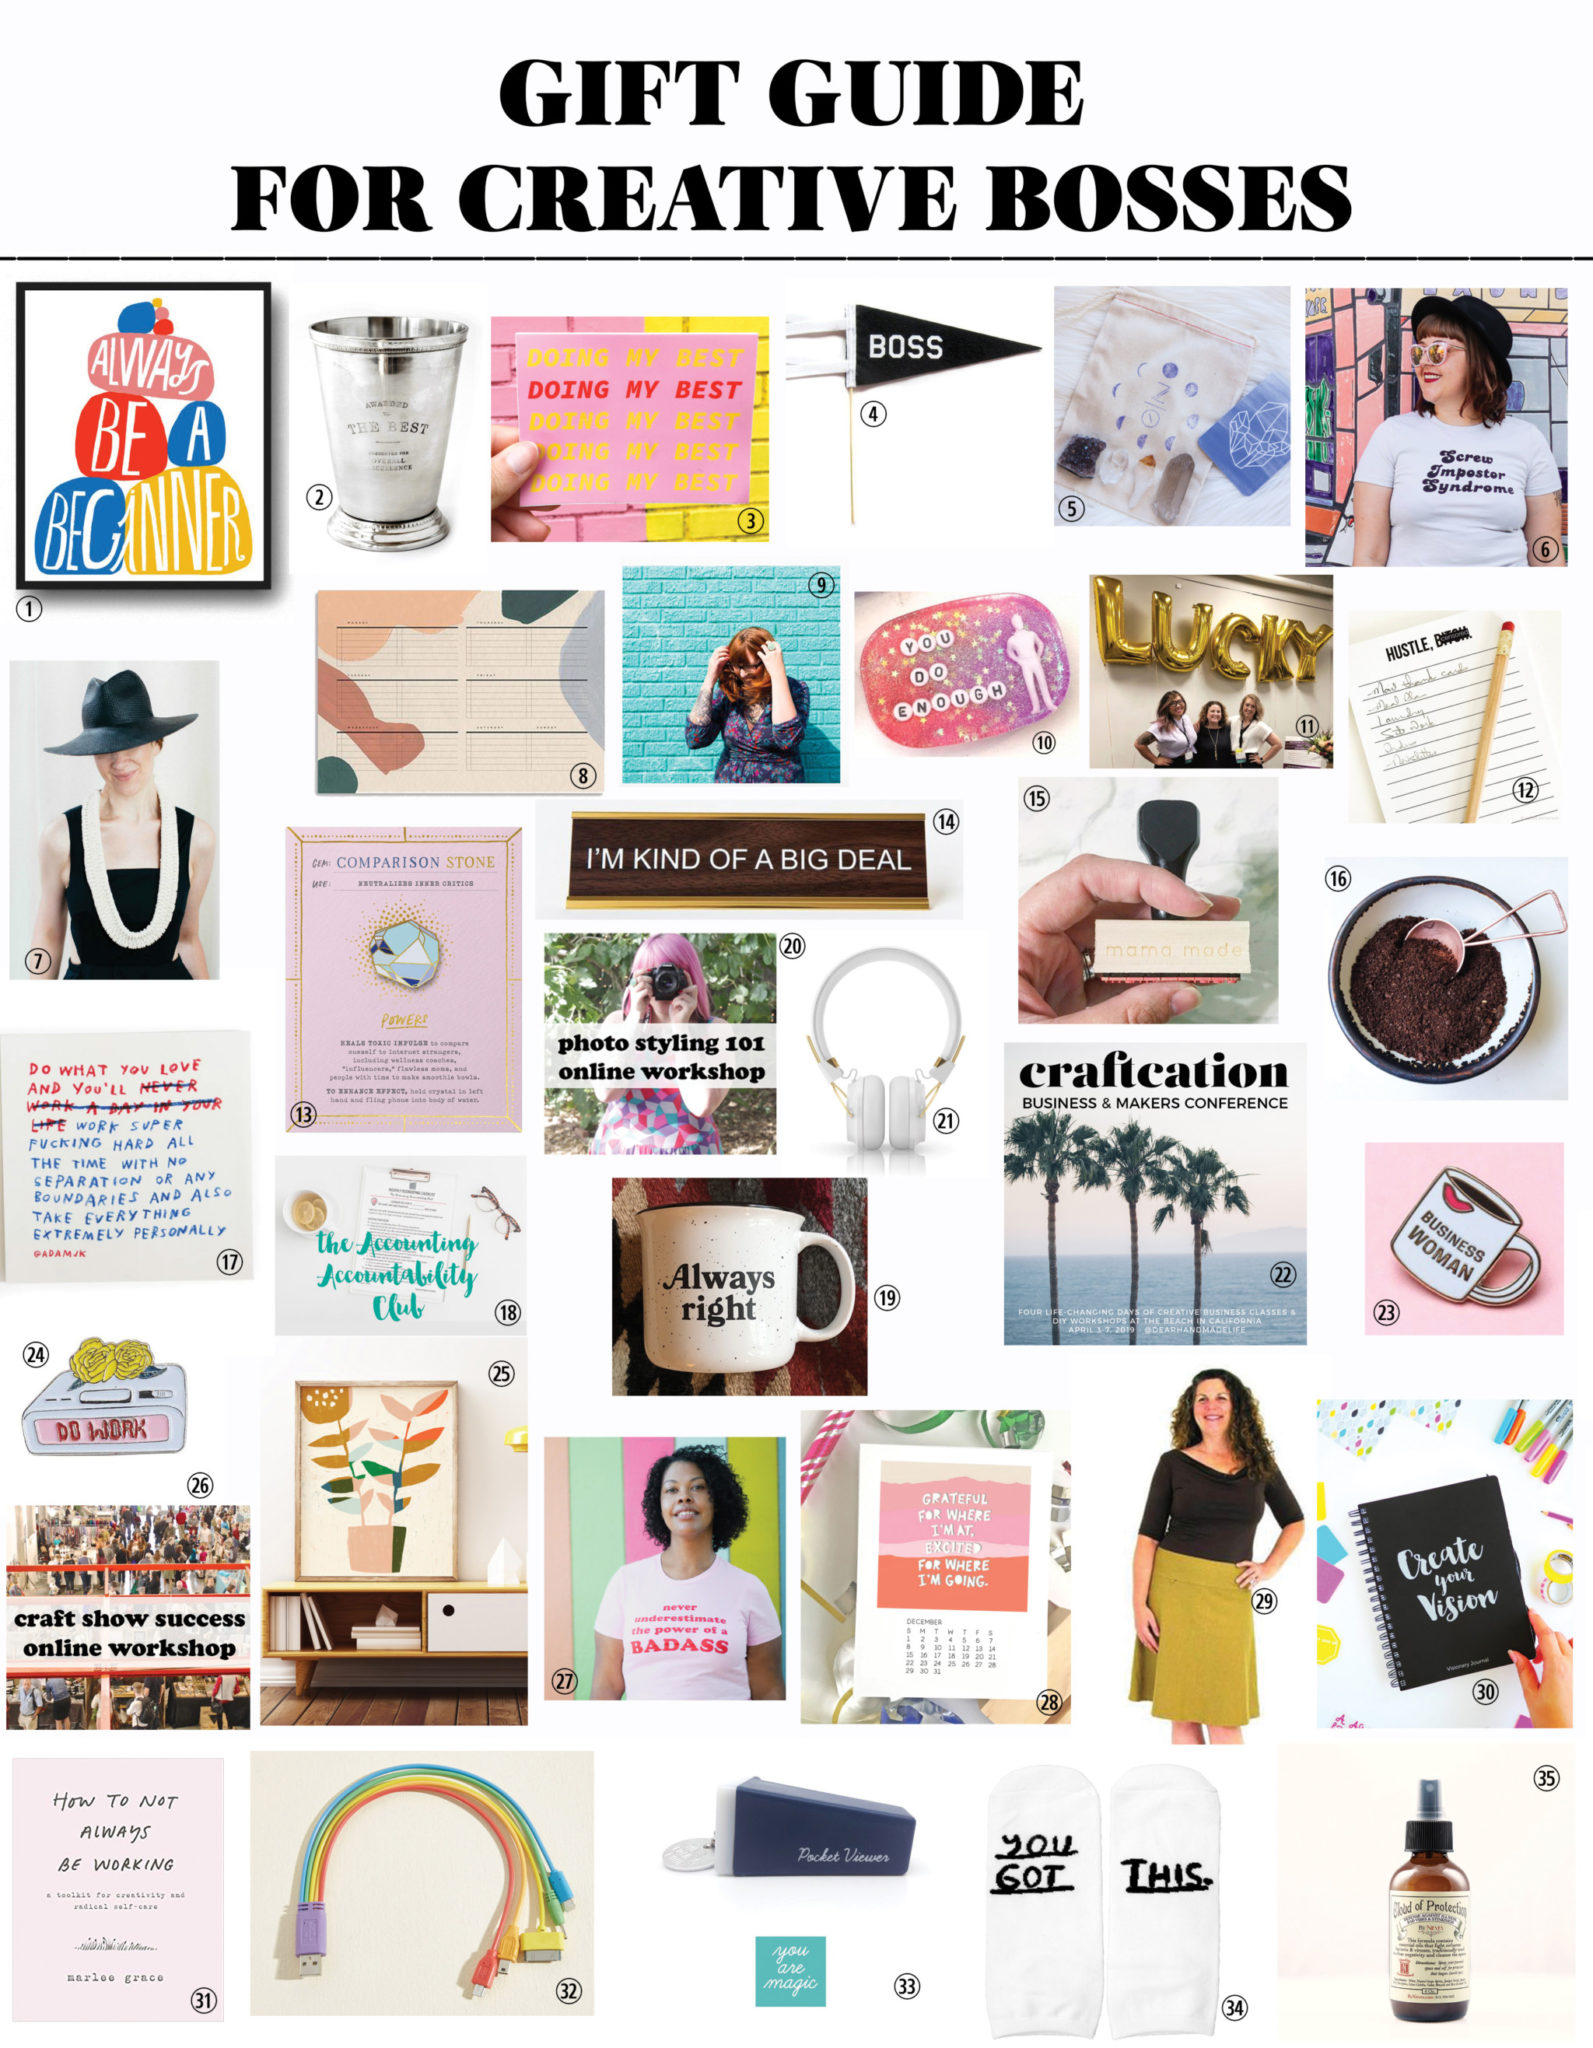 THE Gift Guide for Creative Bosses Lady Women Entrepreneurs Business Owners